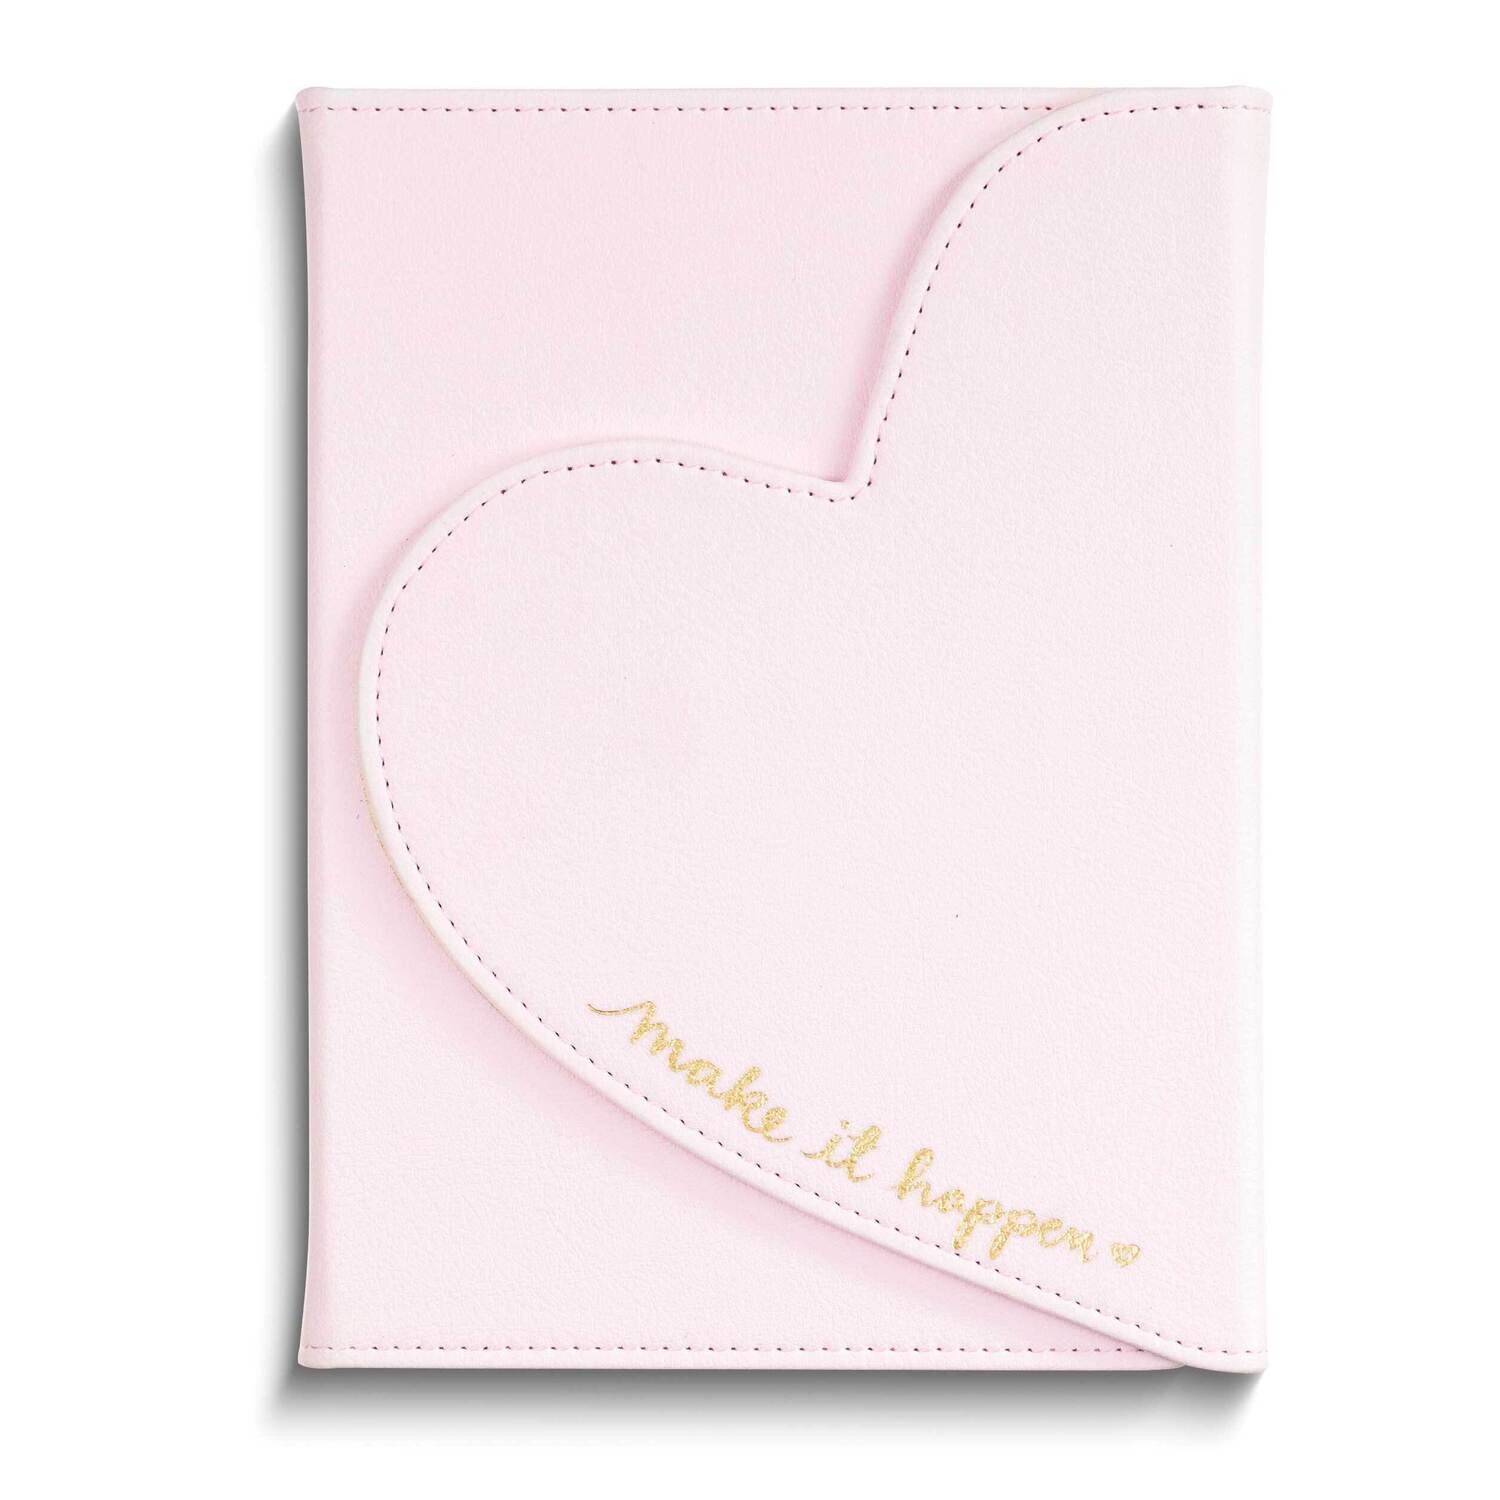 Dayna Lee MAKE IT HAPPEN Pink Heart 5x7 Inch 256-Page Journal GM24460